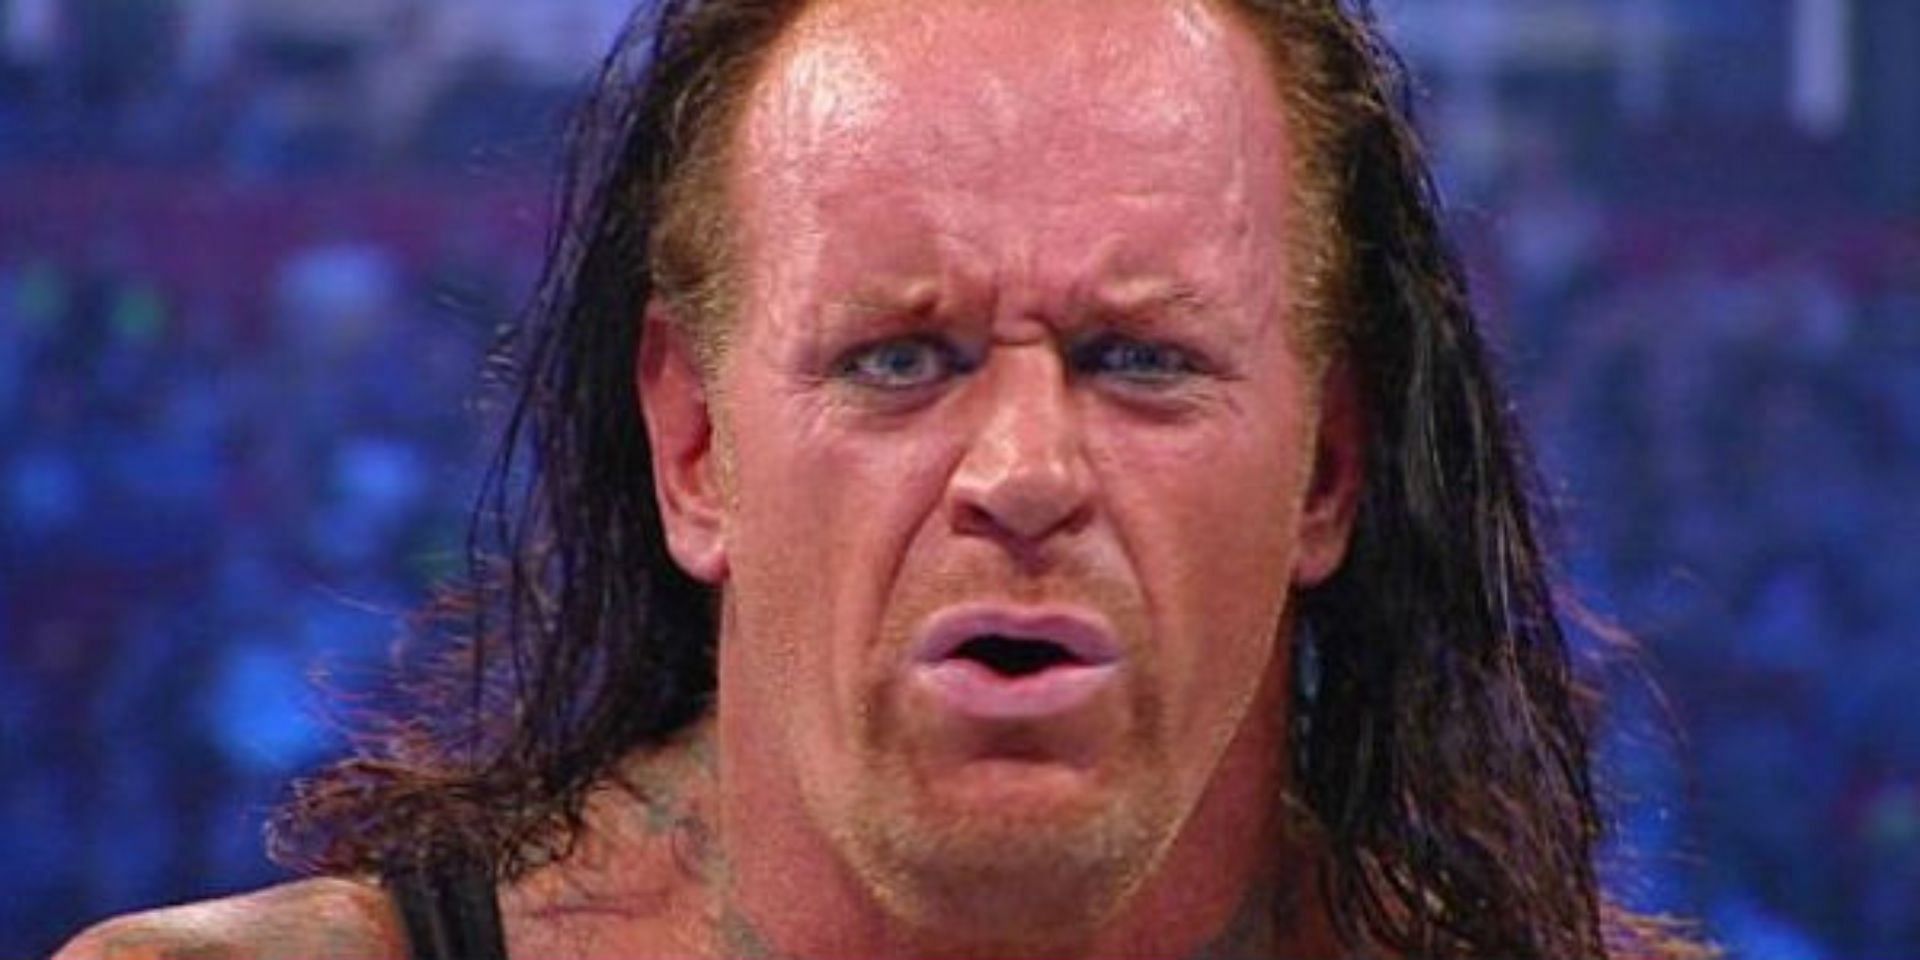 The Undertaker is one WWE